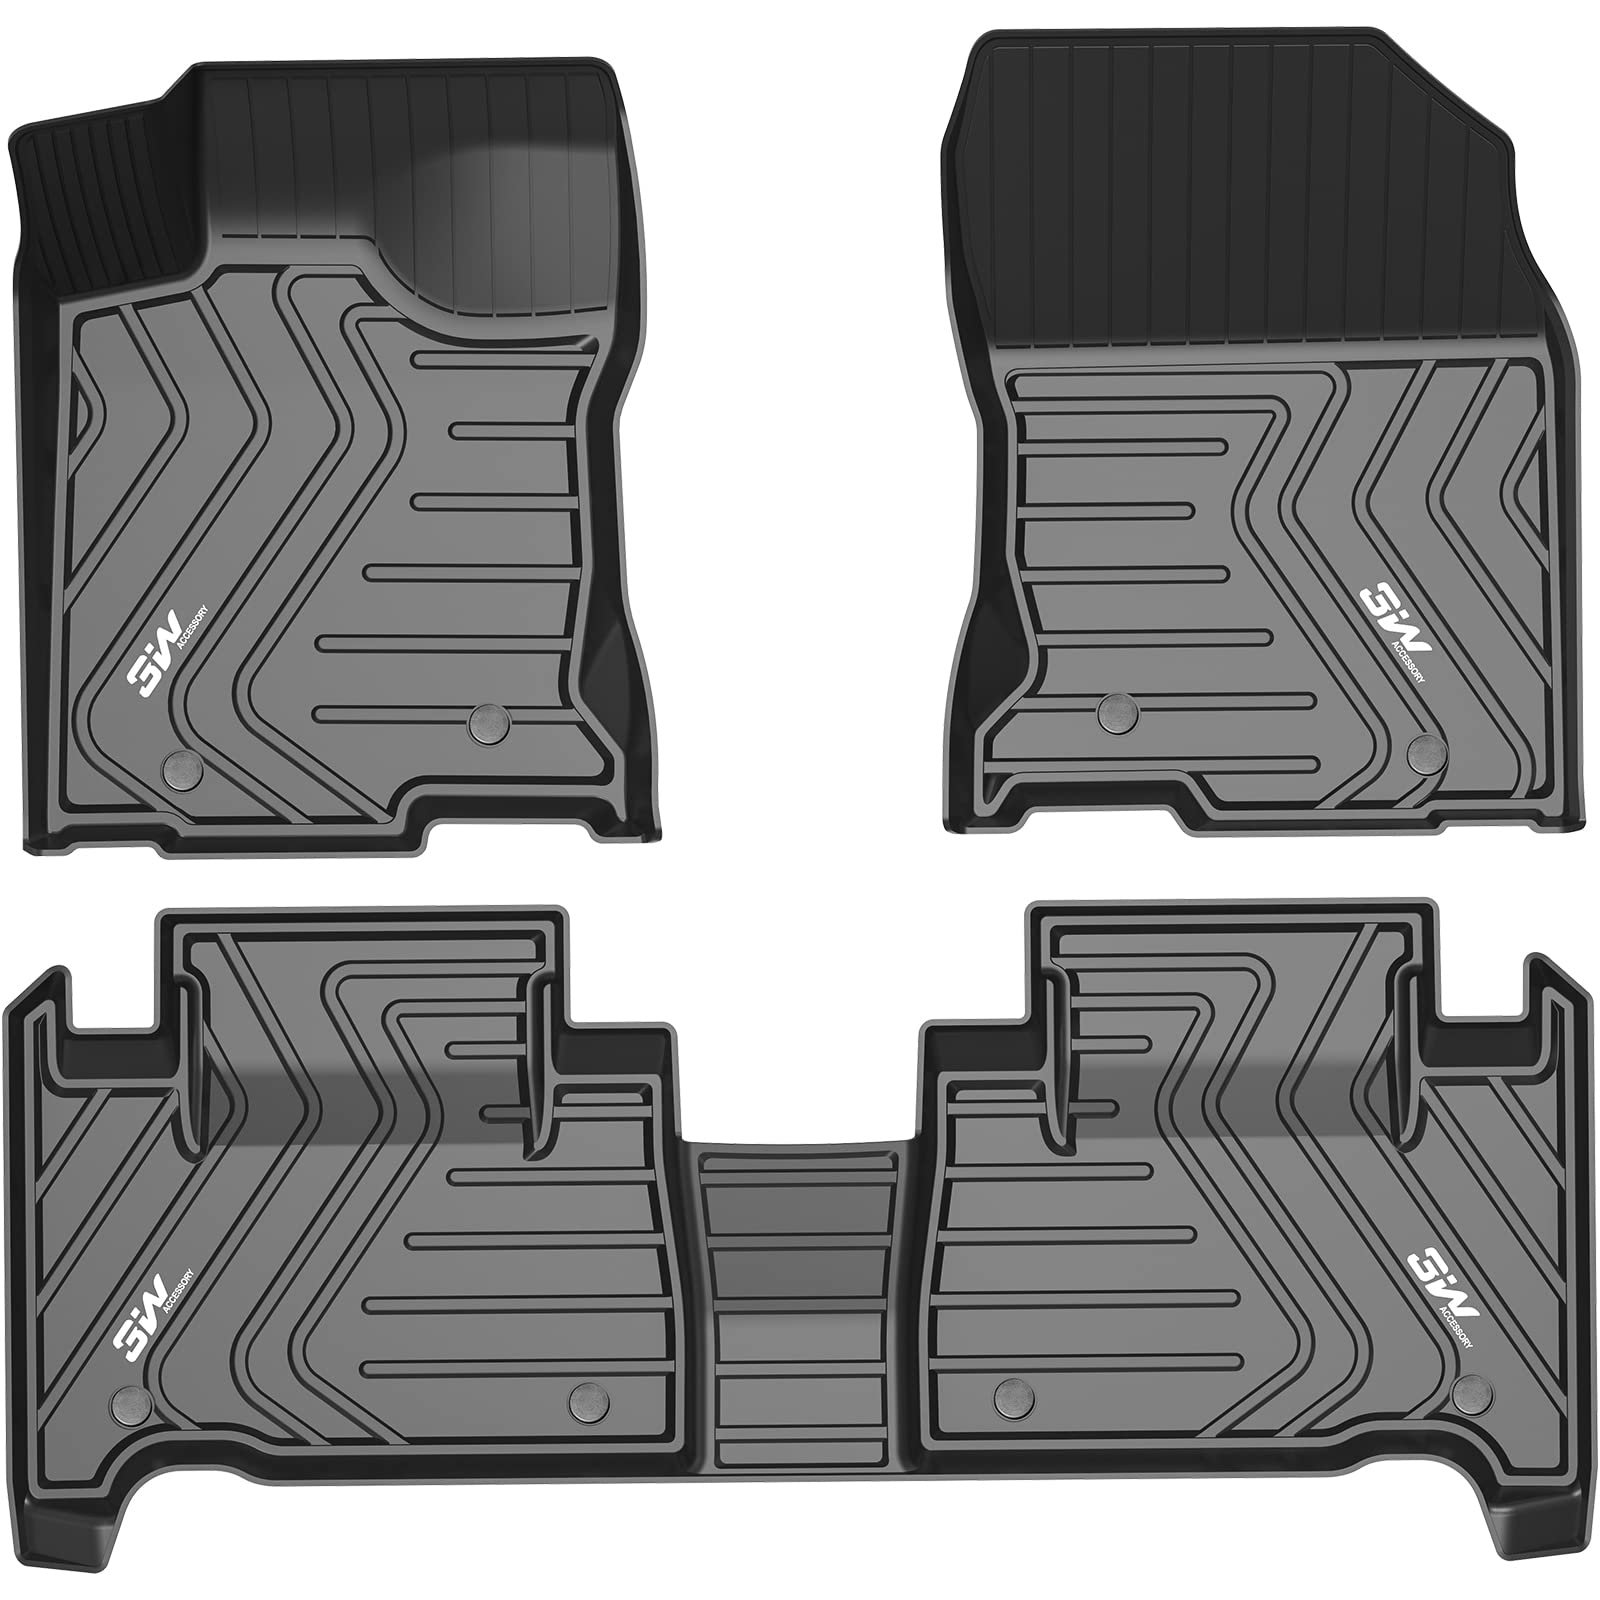 3W Lexus NX 2015-2021 (NX200t/NX300/NX300h) Custom Floor Mats TPE Material & All-Weather Protection Vehicles & Parts 3Wliners 2015-2021 NX 2015-2021 1st&2nd Row Mats